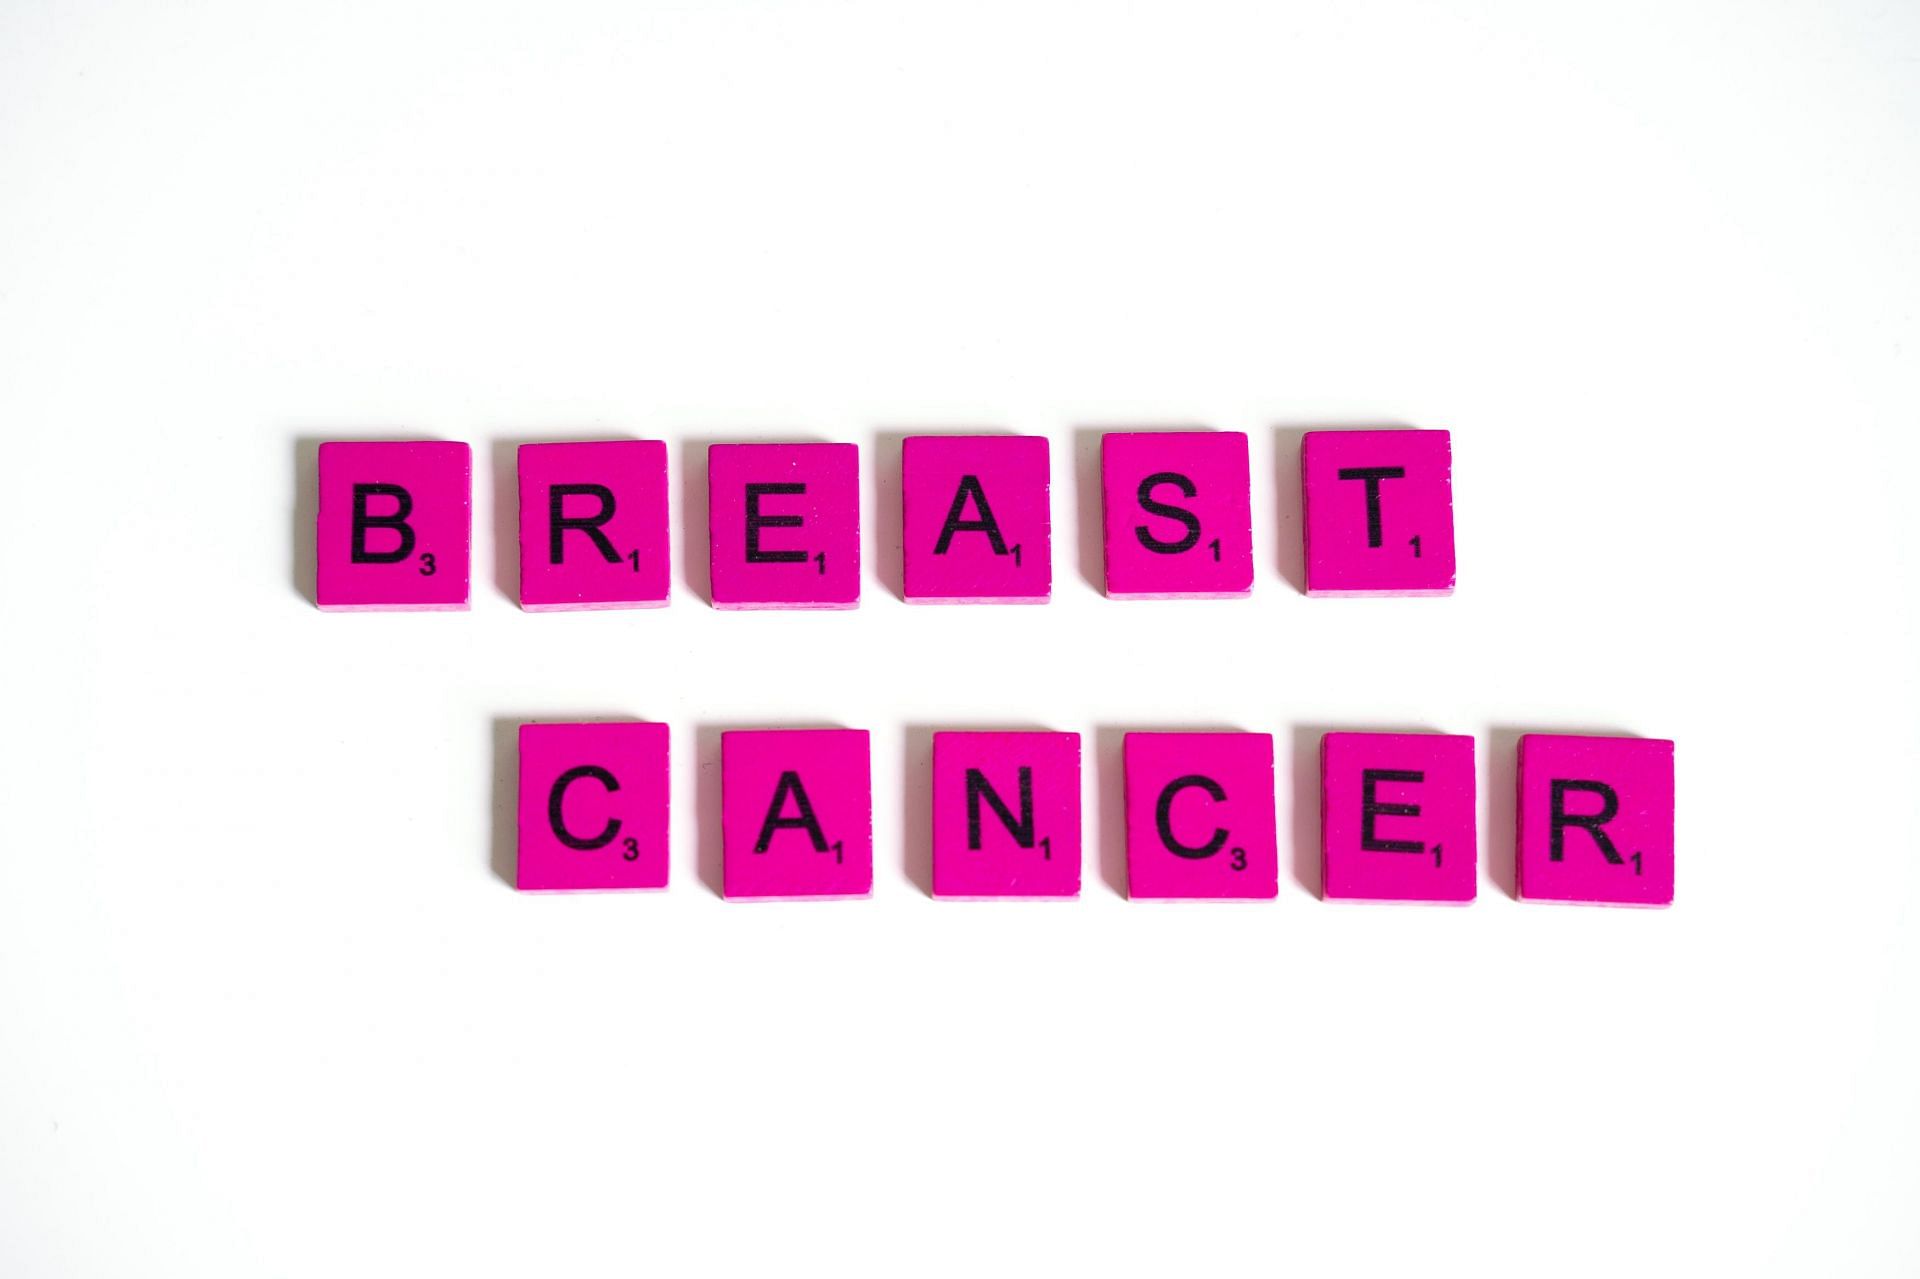 Breast cancer vaccination benefits (Image sourced via Pexels / Photo by Anna Tarazevich)